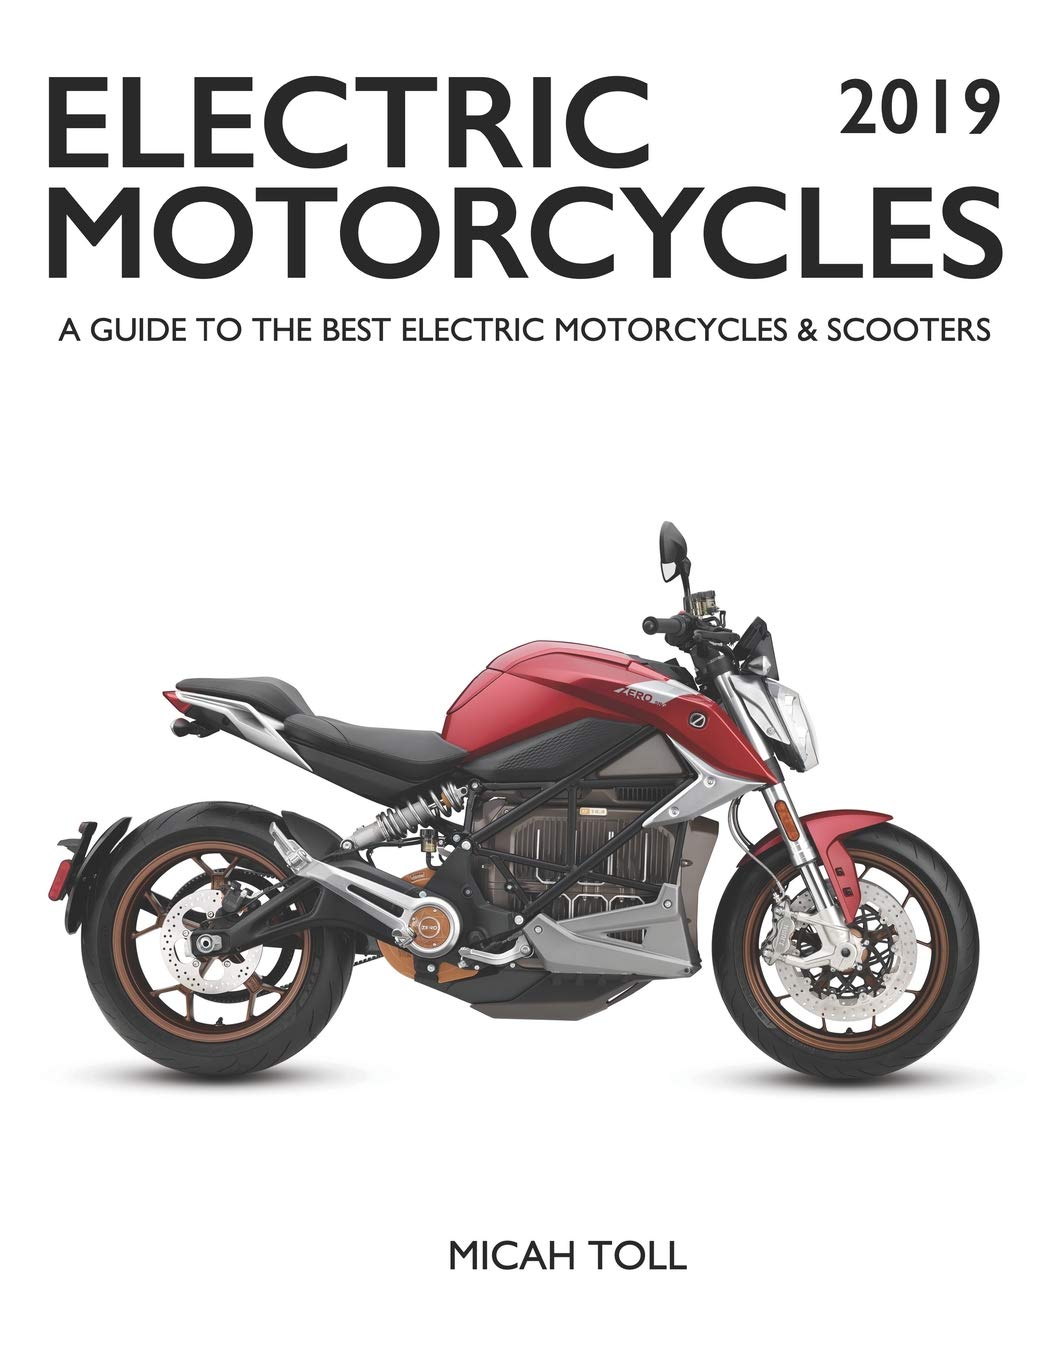 Electric Motorcycles 2019: Your Guide to the Best Electric Motorcycles and Scooters